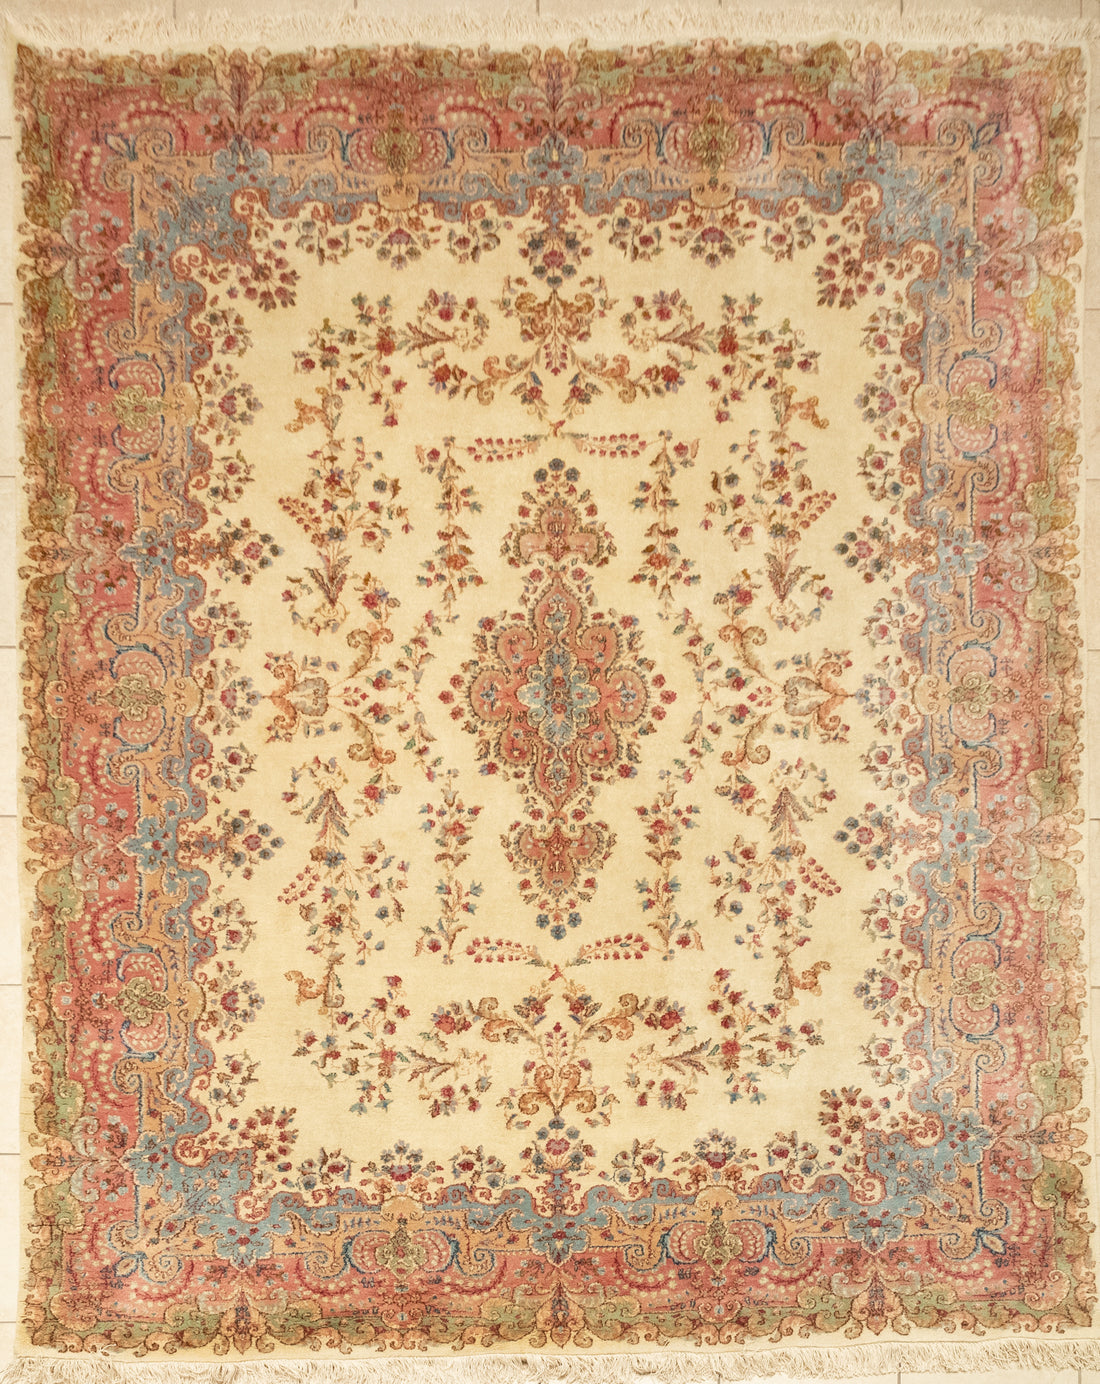 Hand-Knotted Wool Rug 11'6" x 8'9"